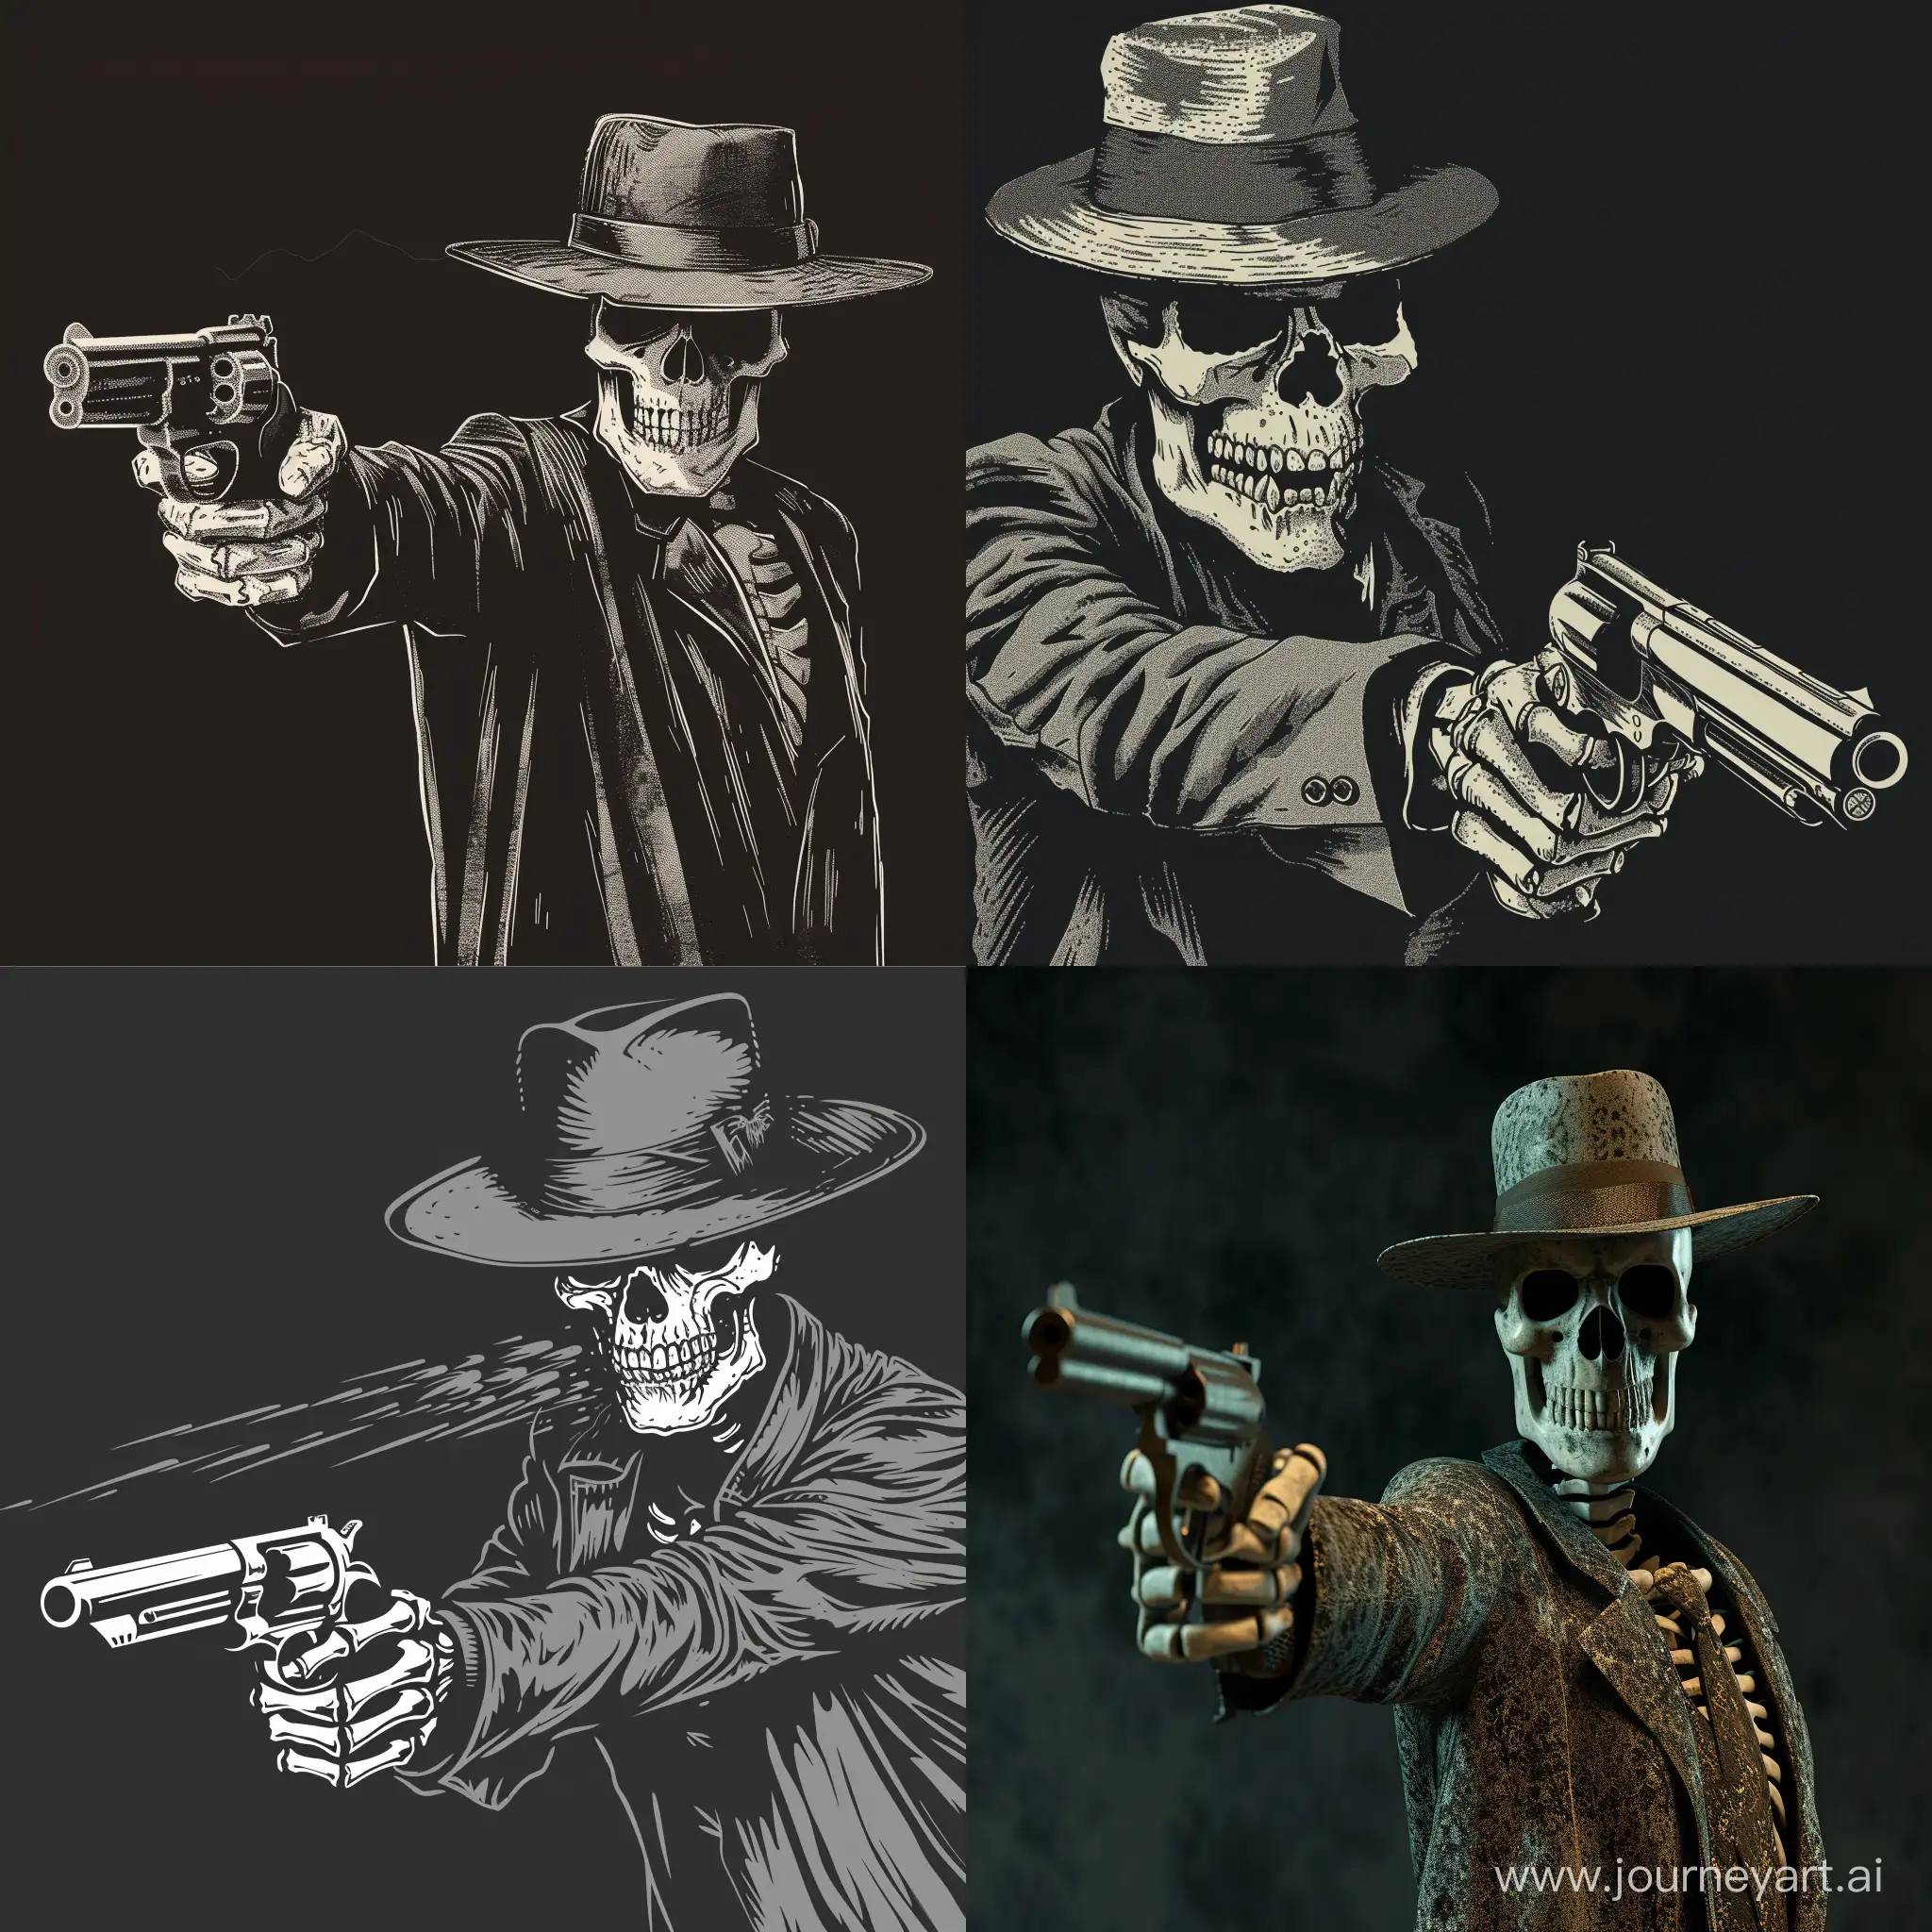 Sinister-Skeleton-Mafia-Boss-Armed-with-Gun-and-Hat